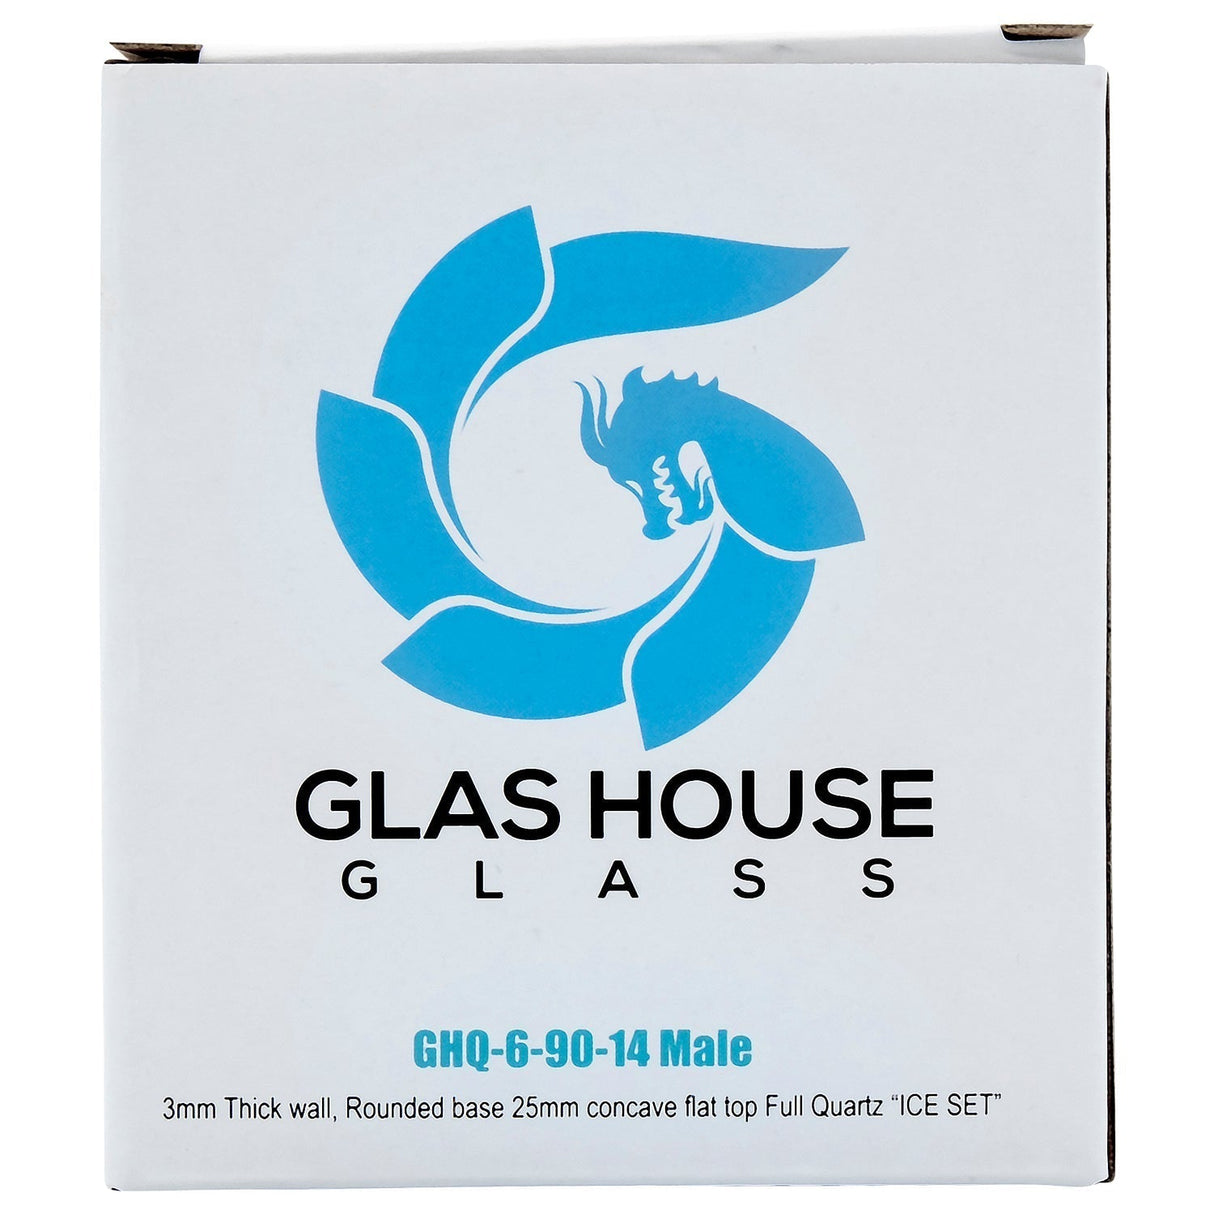 Glasshouse Quartz Kit packaging with logo, 3mm thick male joint, 25mm concave flattop